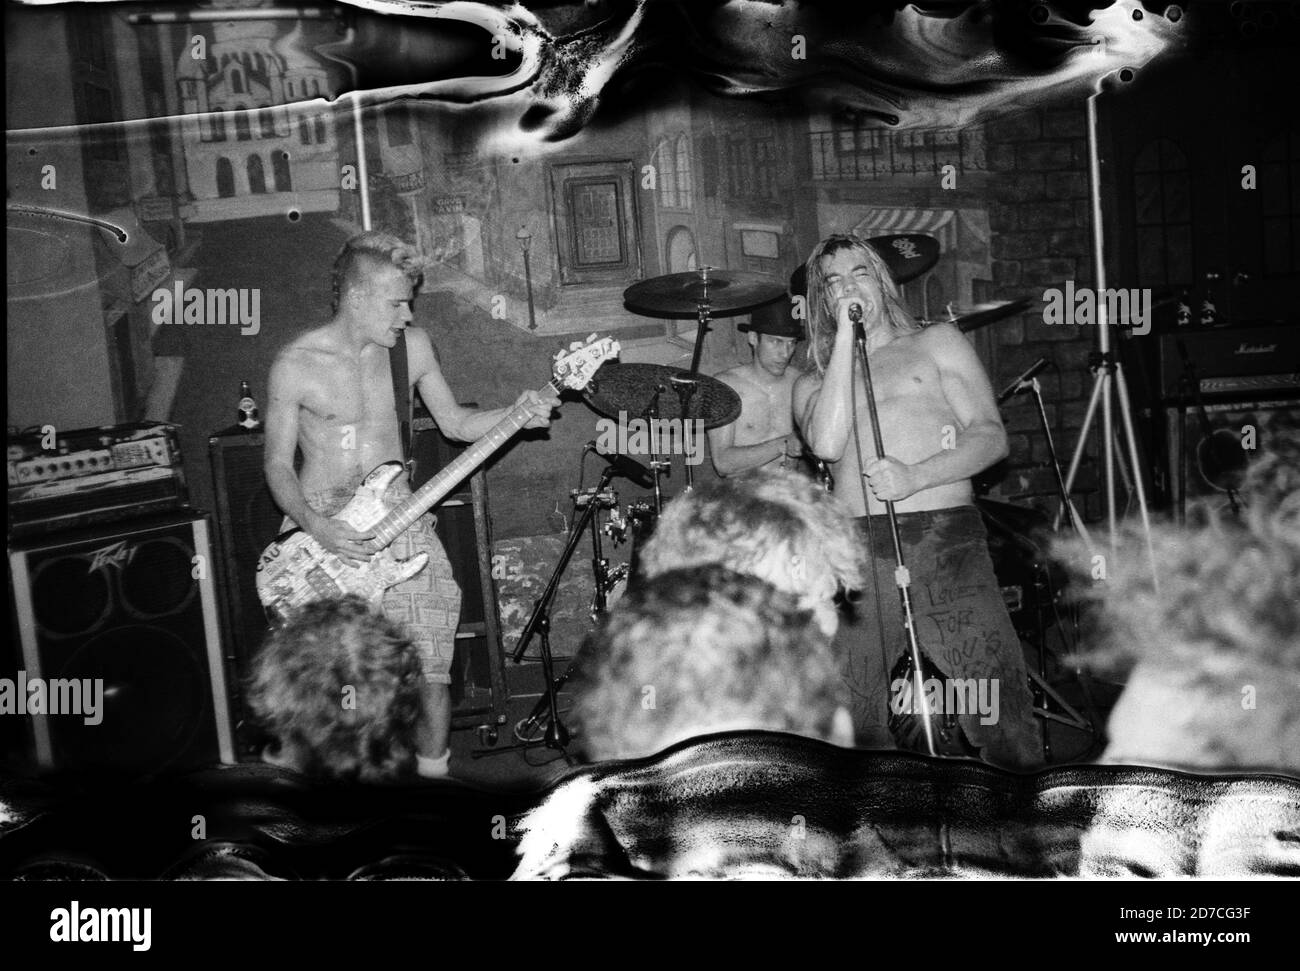 Flea (Peter Michael Balzary, left) and Anthony Kiedis of  Red Hot Chili Peppers performing at the Red Creek Inn, Rochester, NY, USA on November 10th, 1985 - Photo has technical imperfections! Stock Photo